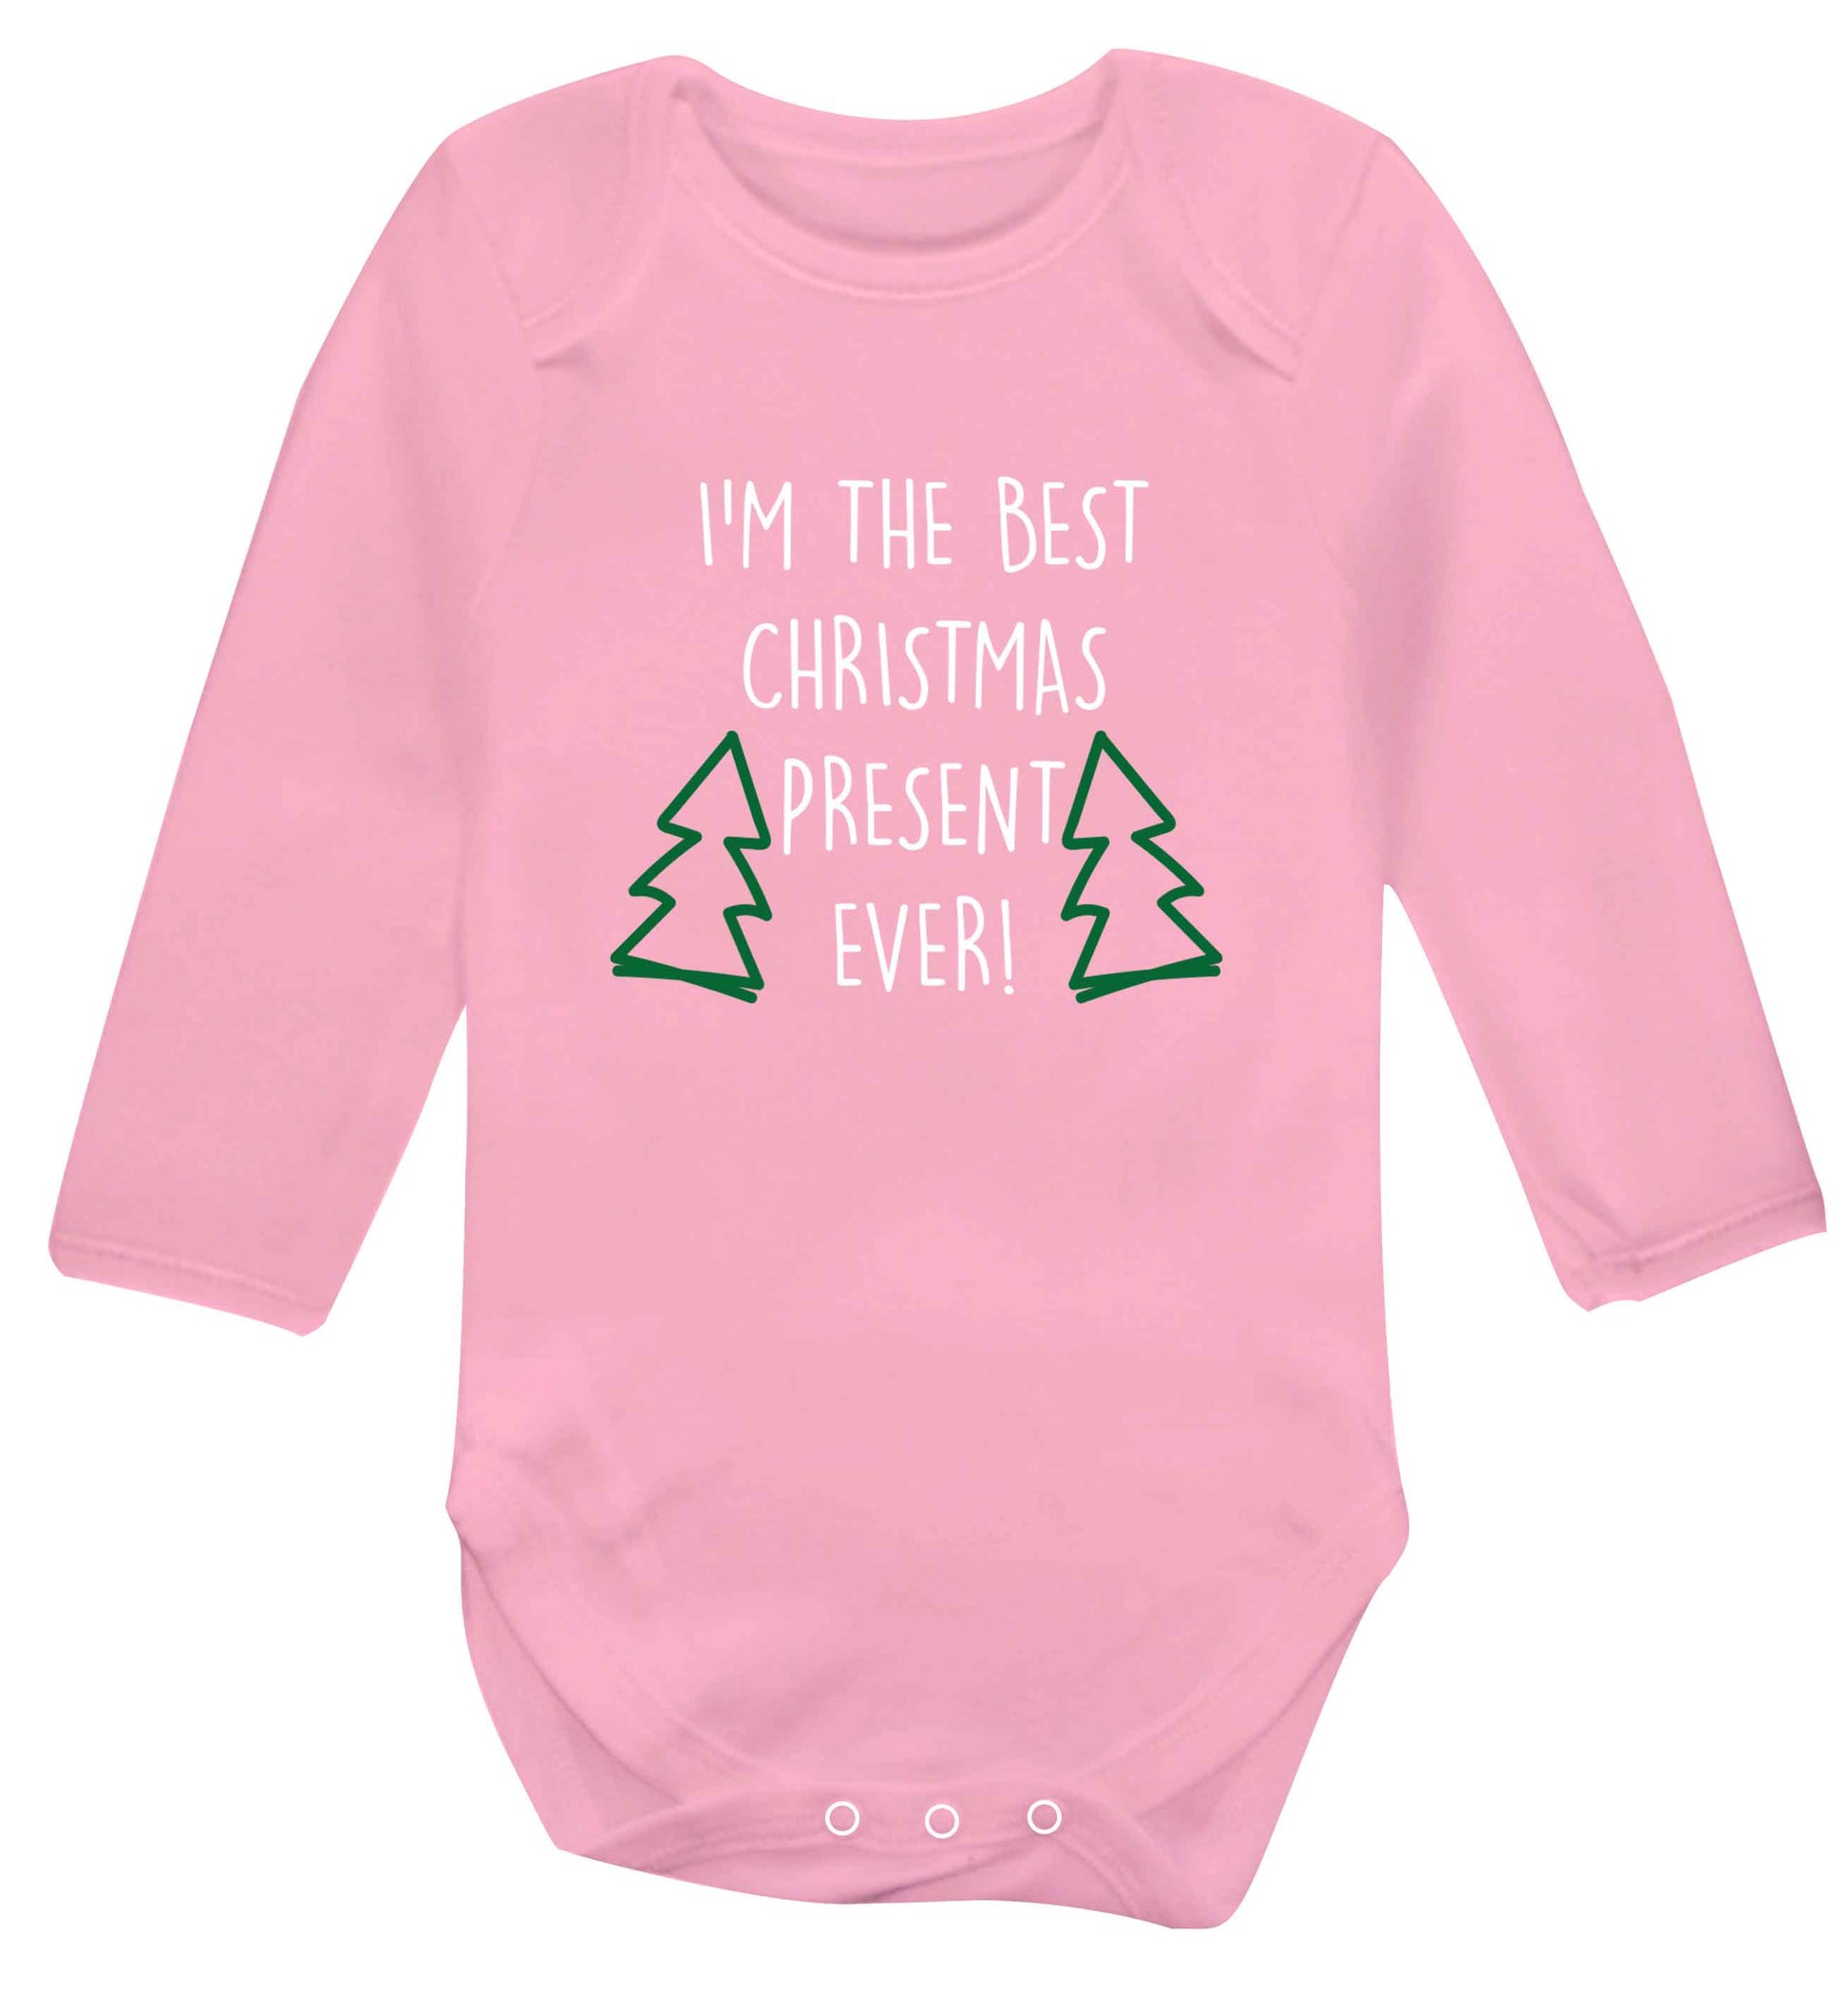 I'm the best Christmas present ever baby vest long sleeved pale pink 6-12 months